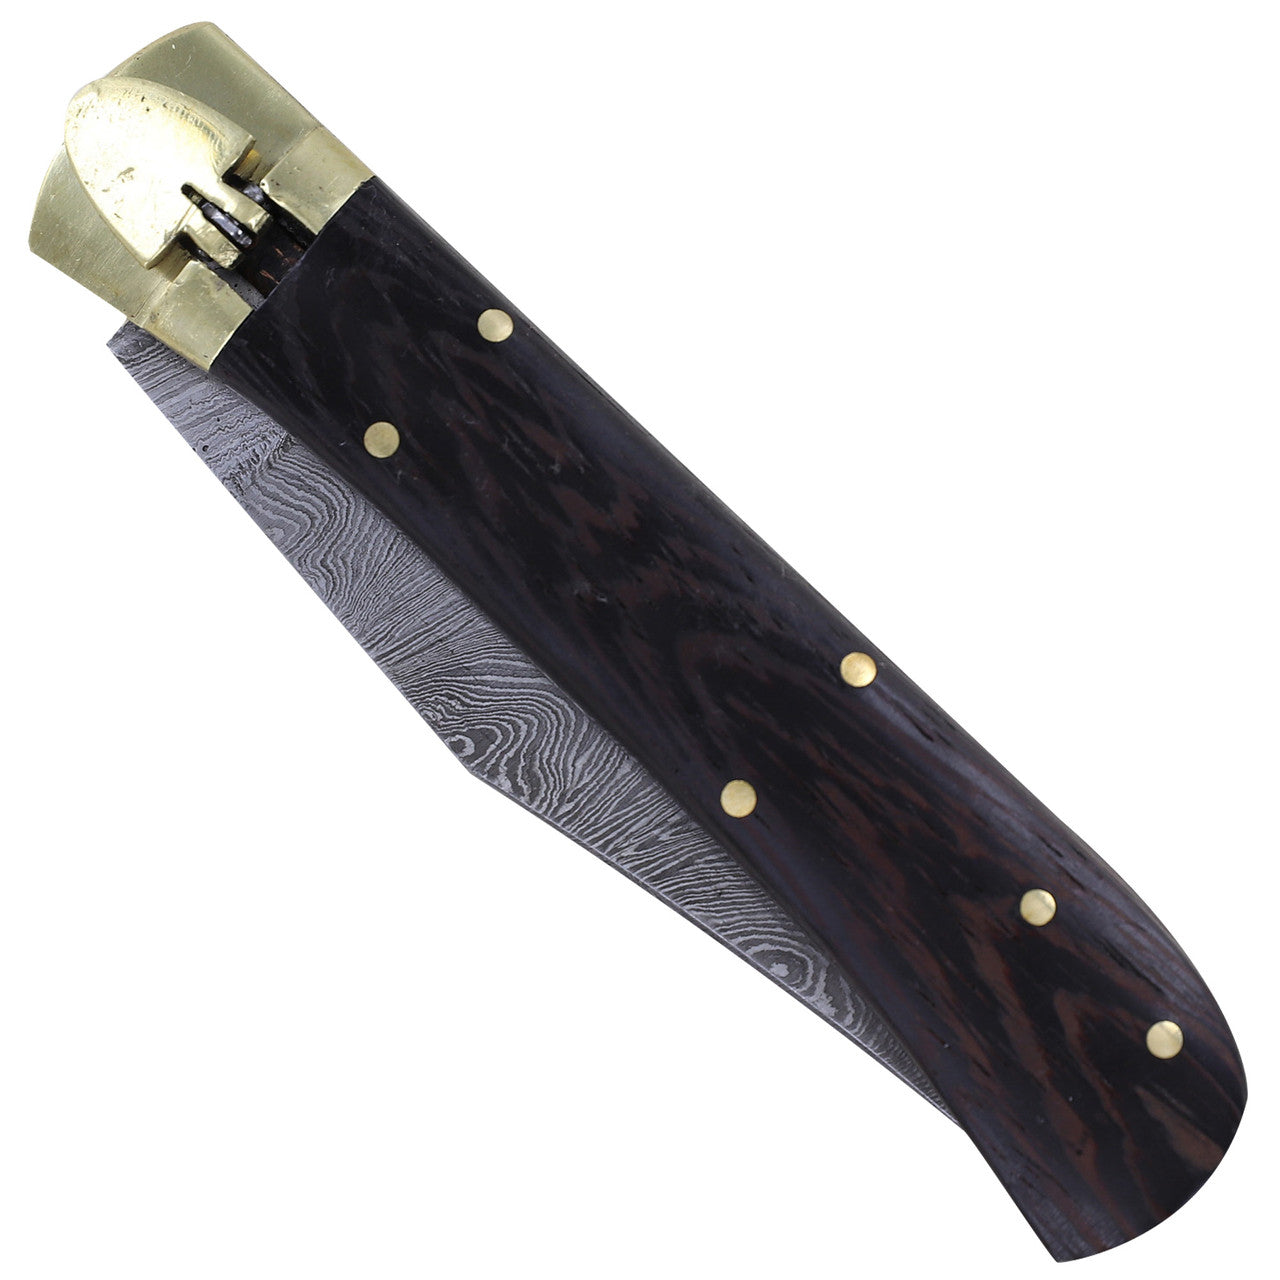 Dark Wood Lullaby Damascus Automatic Switchblade Lever Lock Knife